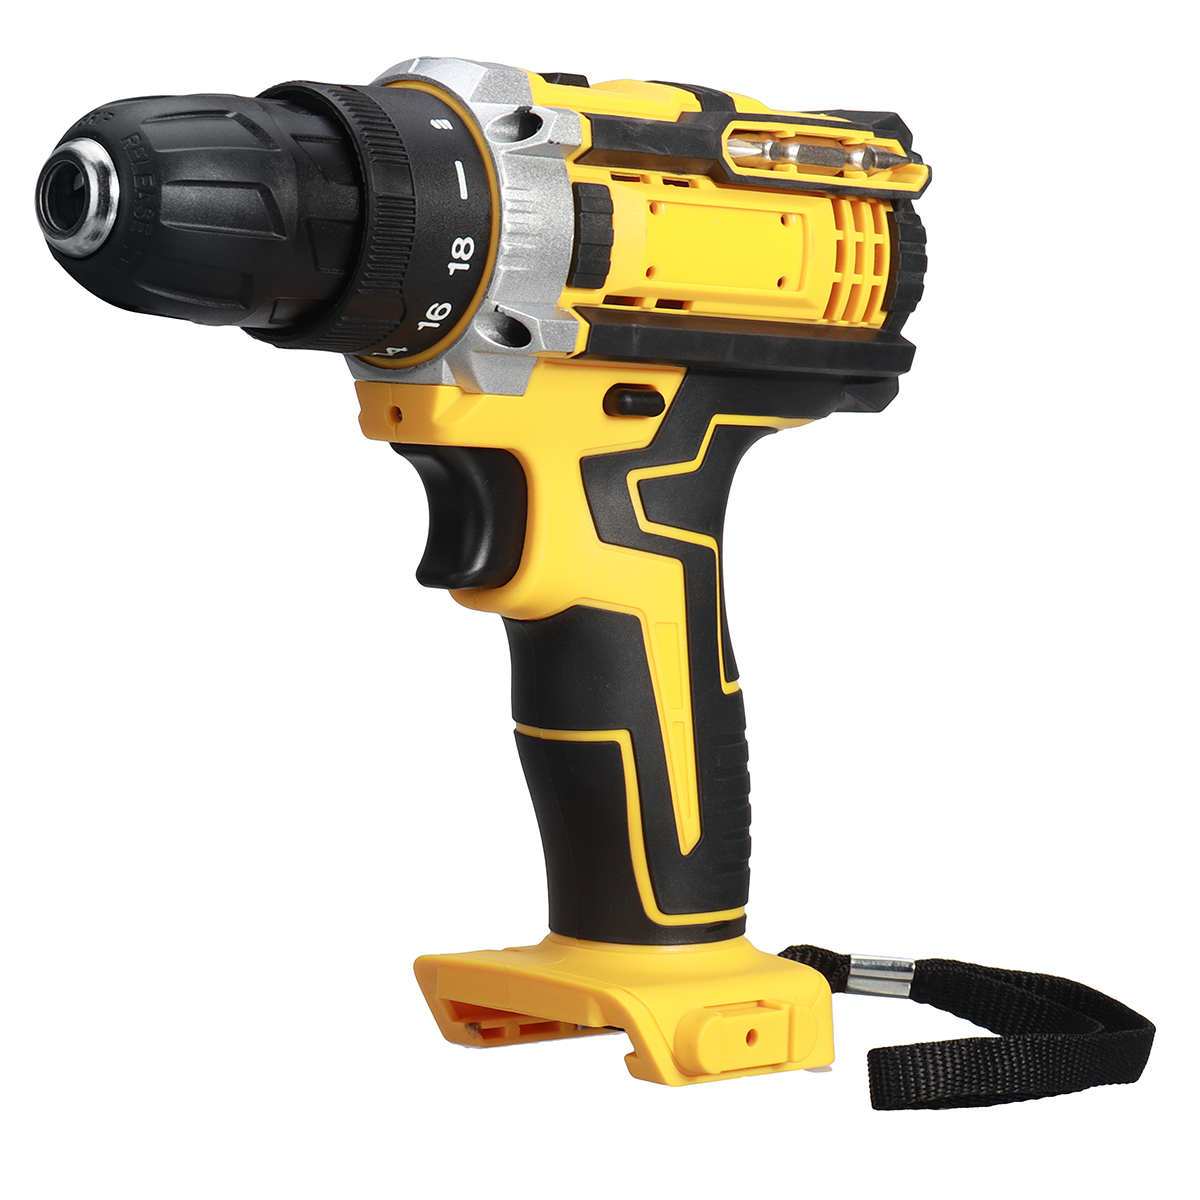 21V-Wireless-Rechargeable-Impact-Hammer-Drill-Electric-Screwdriver-W-Battery--Storage-Case-Screwing--1858203-16